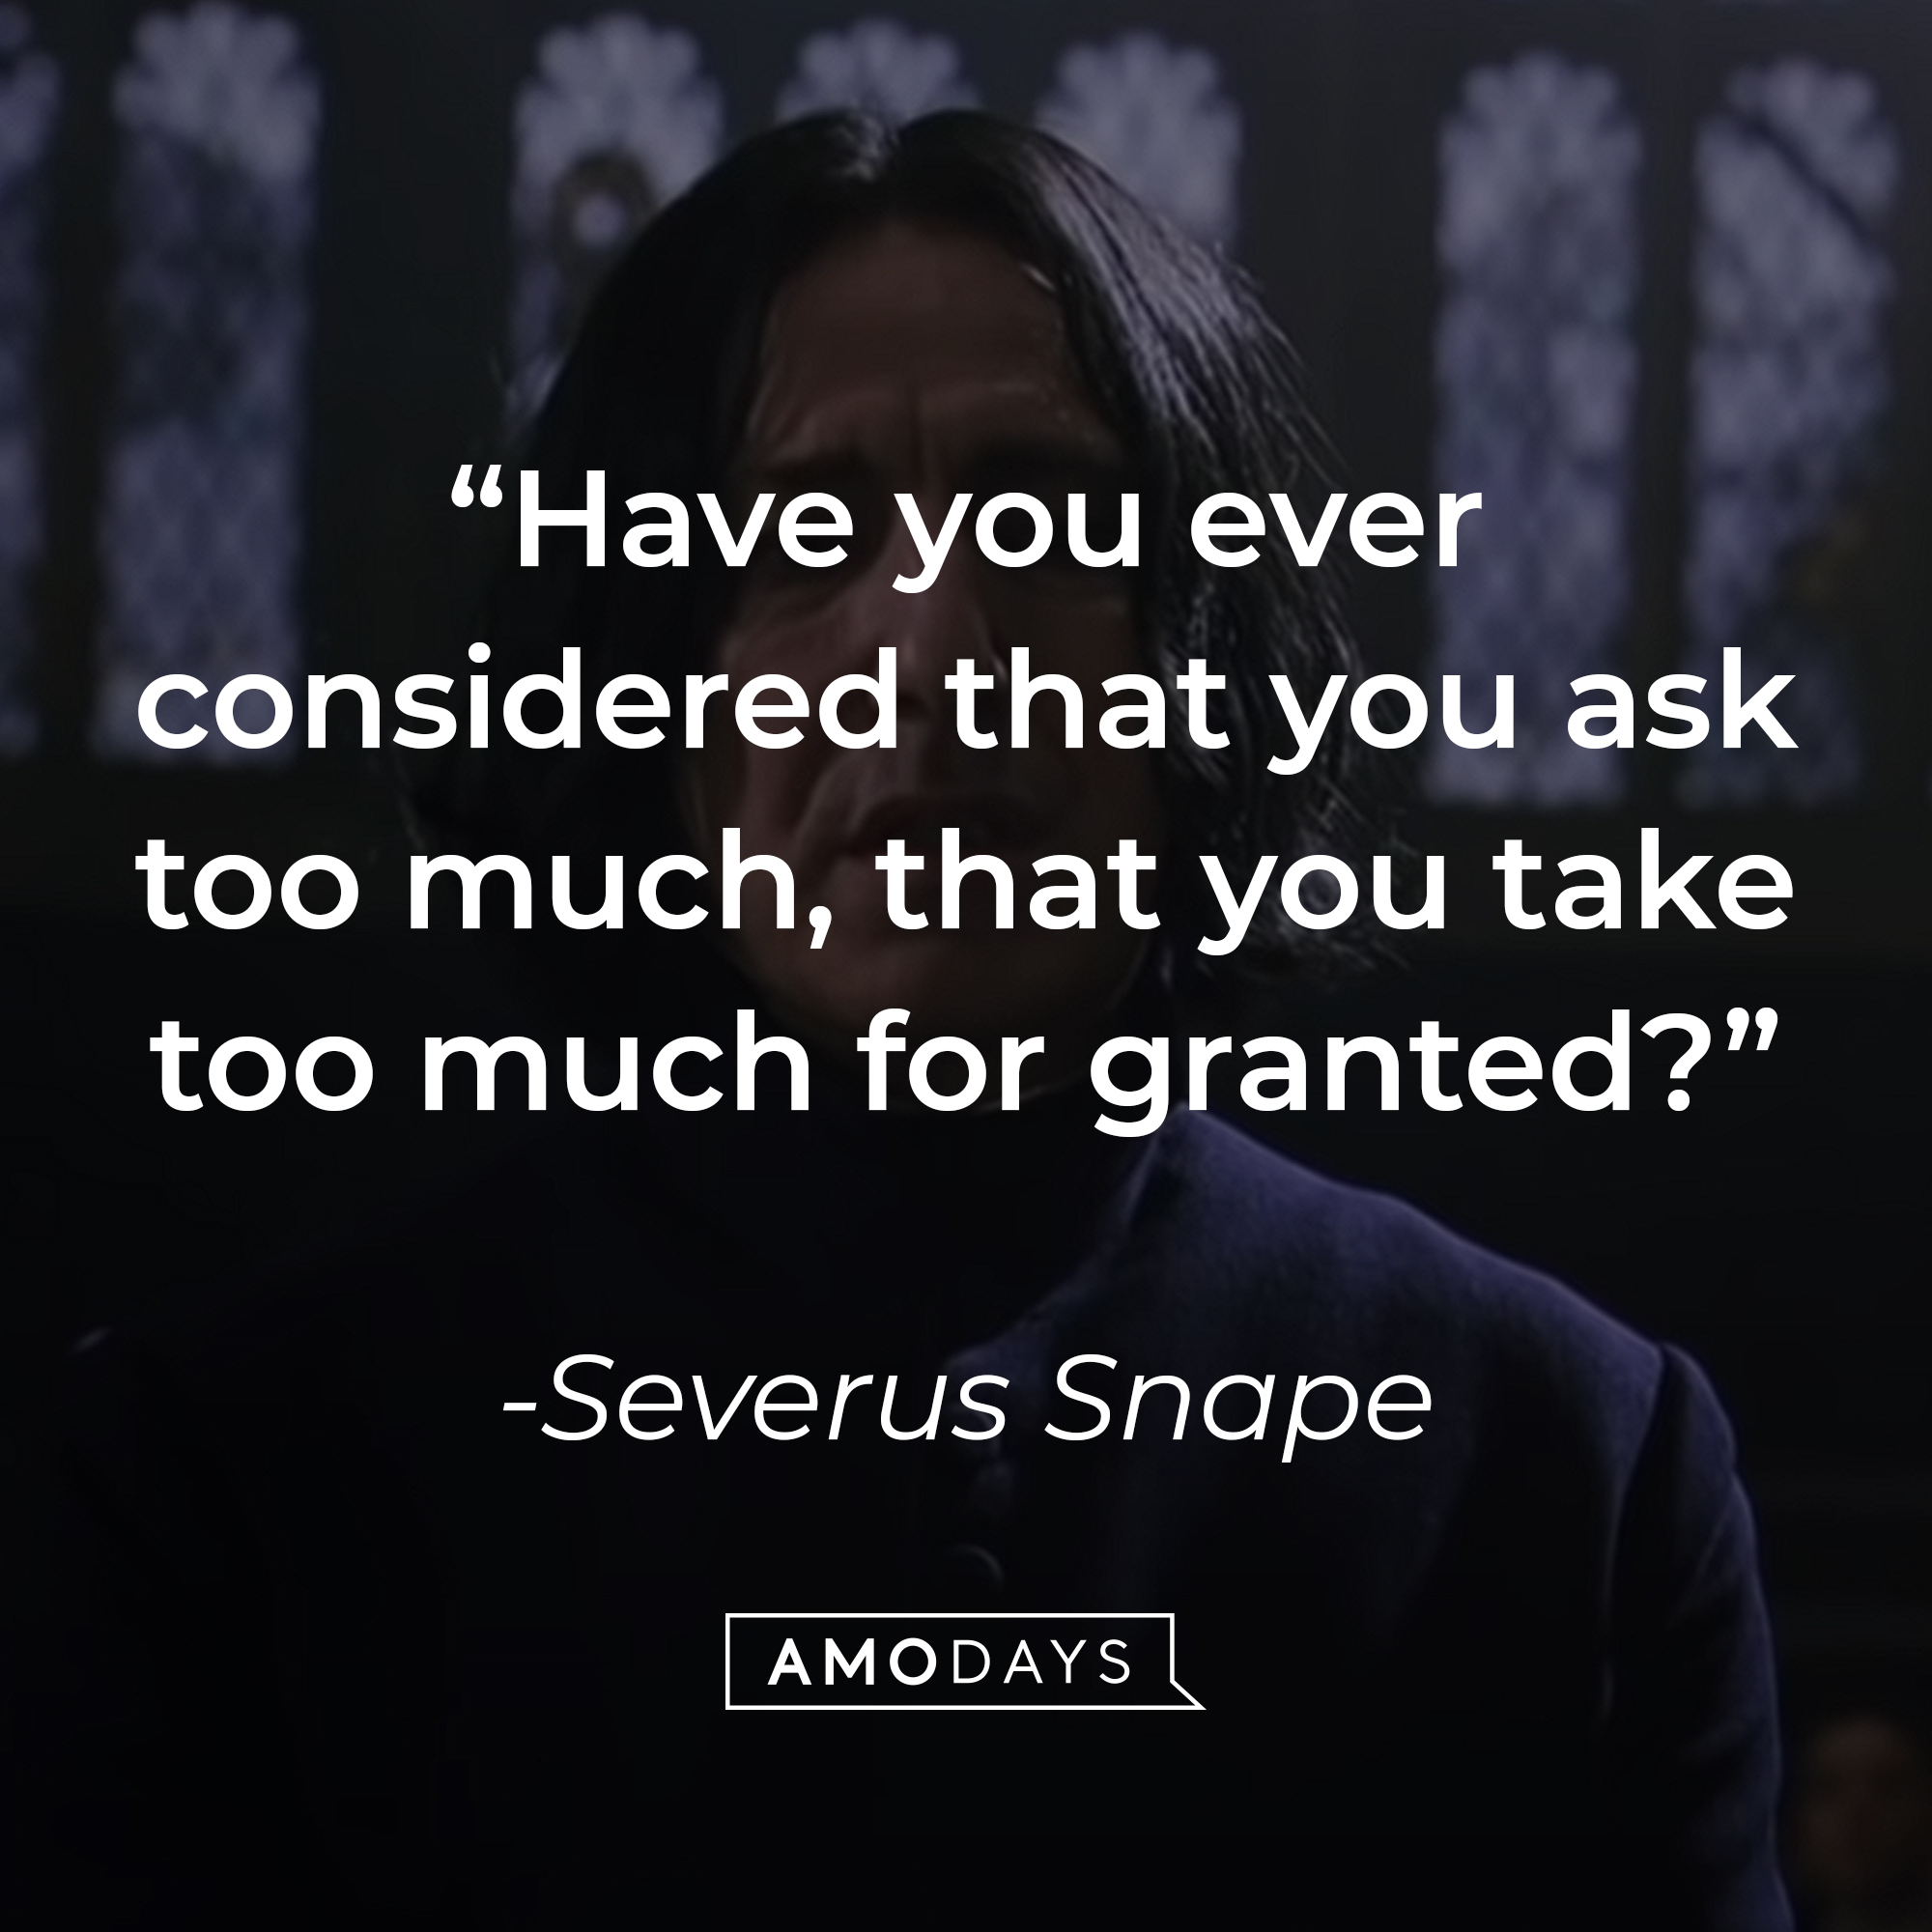 Severus Snape's quote: "Have you ever considered that you ask too much, that you take too much for granted?" | Source: YouTube/harrypotter